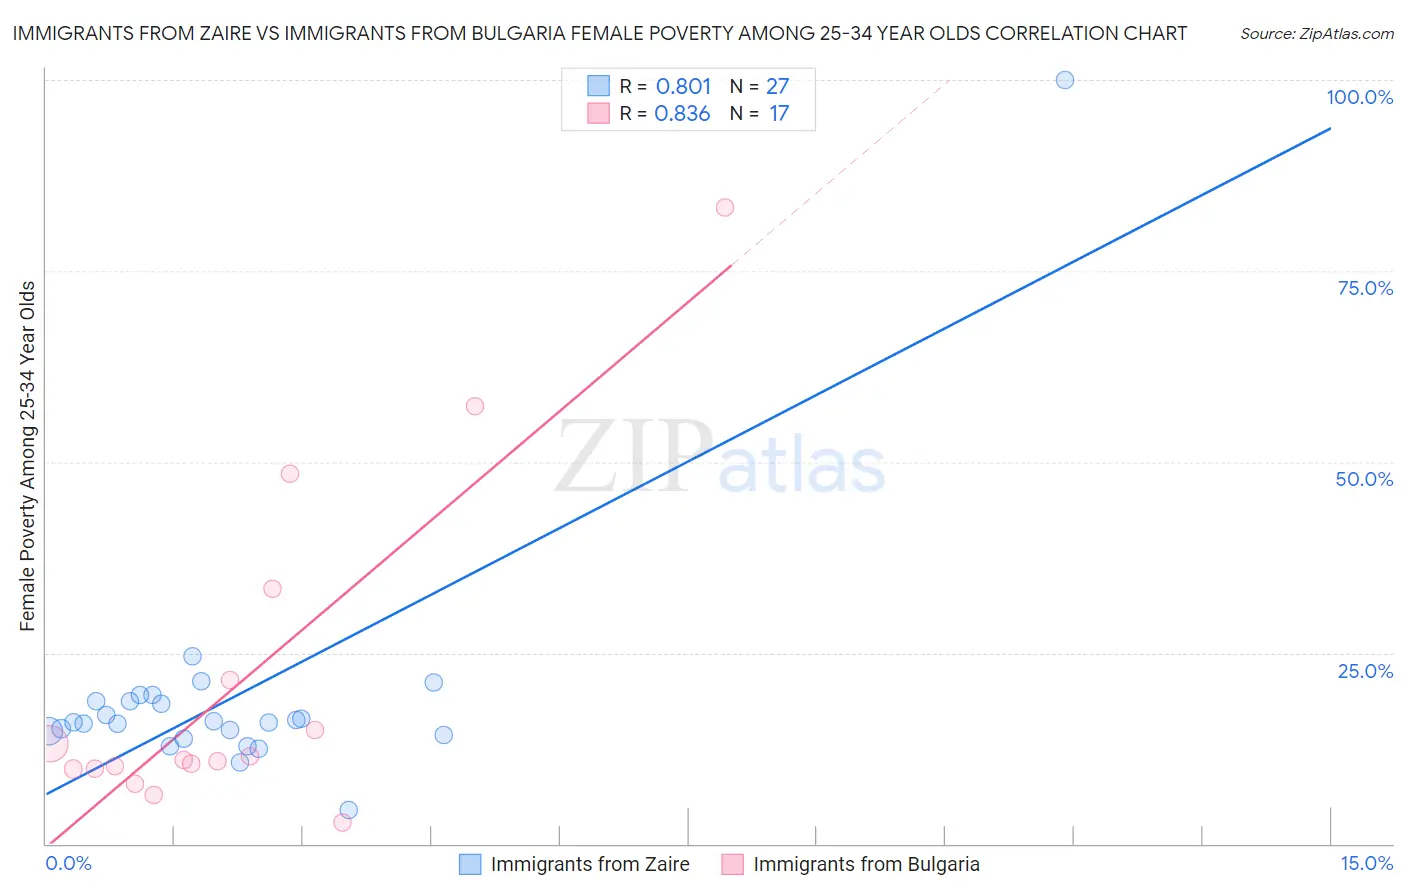 Immigrants from Zaire vs Immigrants from Bulgaria Female Poverty Among 25-34 Year Olds